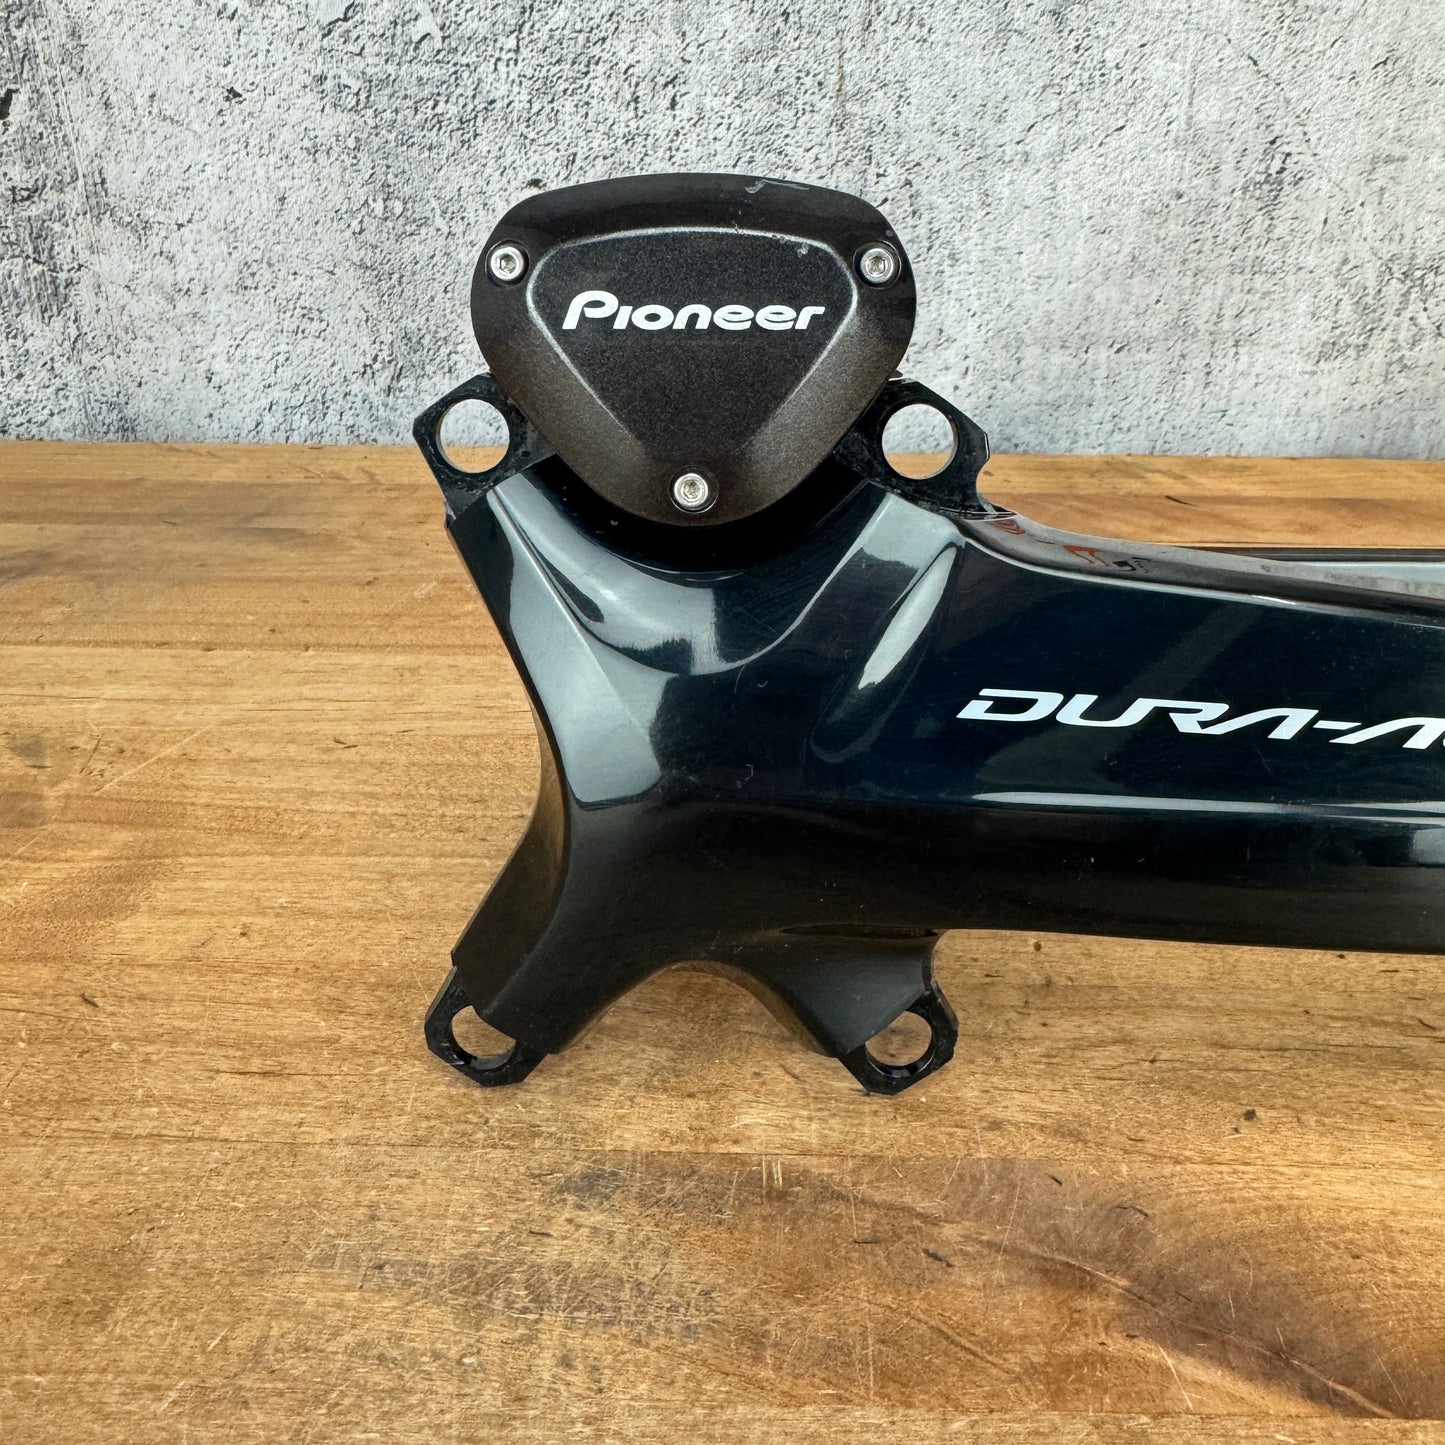 Pioneer SBT-PM91 Dura-Ace FC-R9100 172.5mm Dual Sided Power Meter Crank Arms